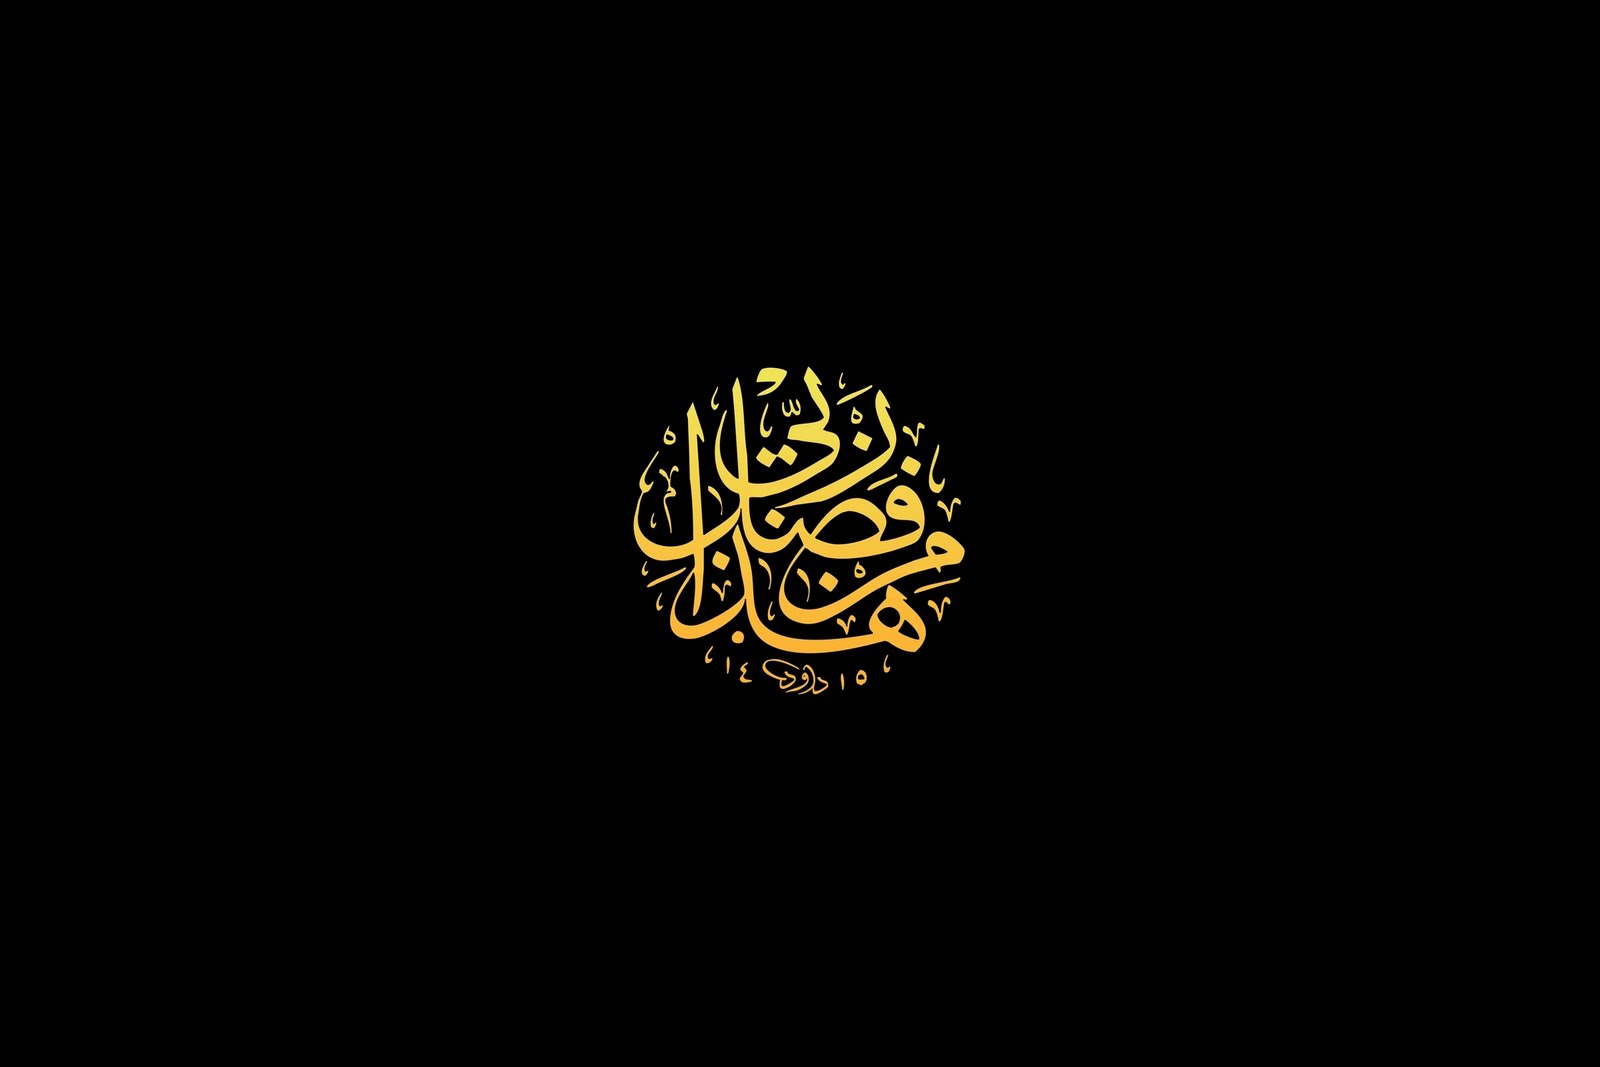 Islamic Calligraphic Wallpapers Islamic Quotes About